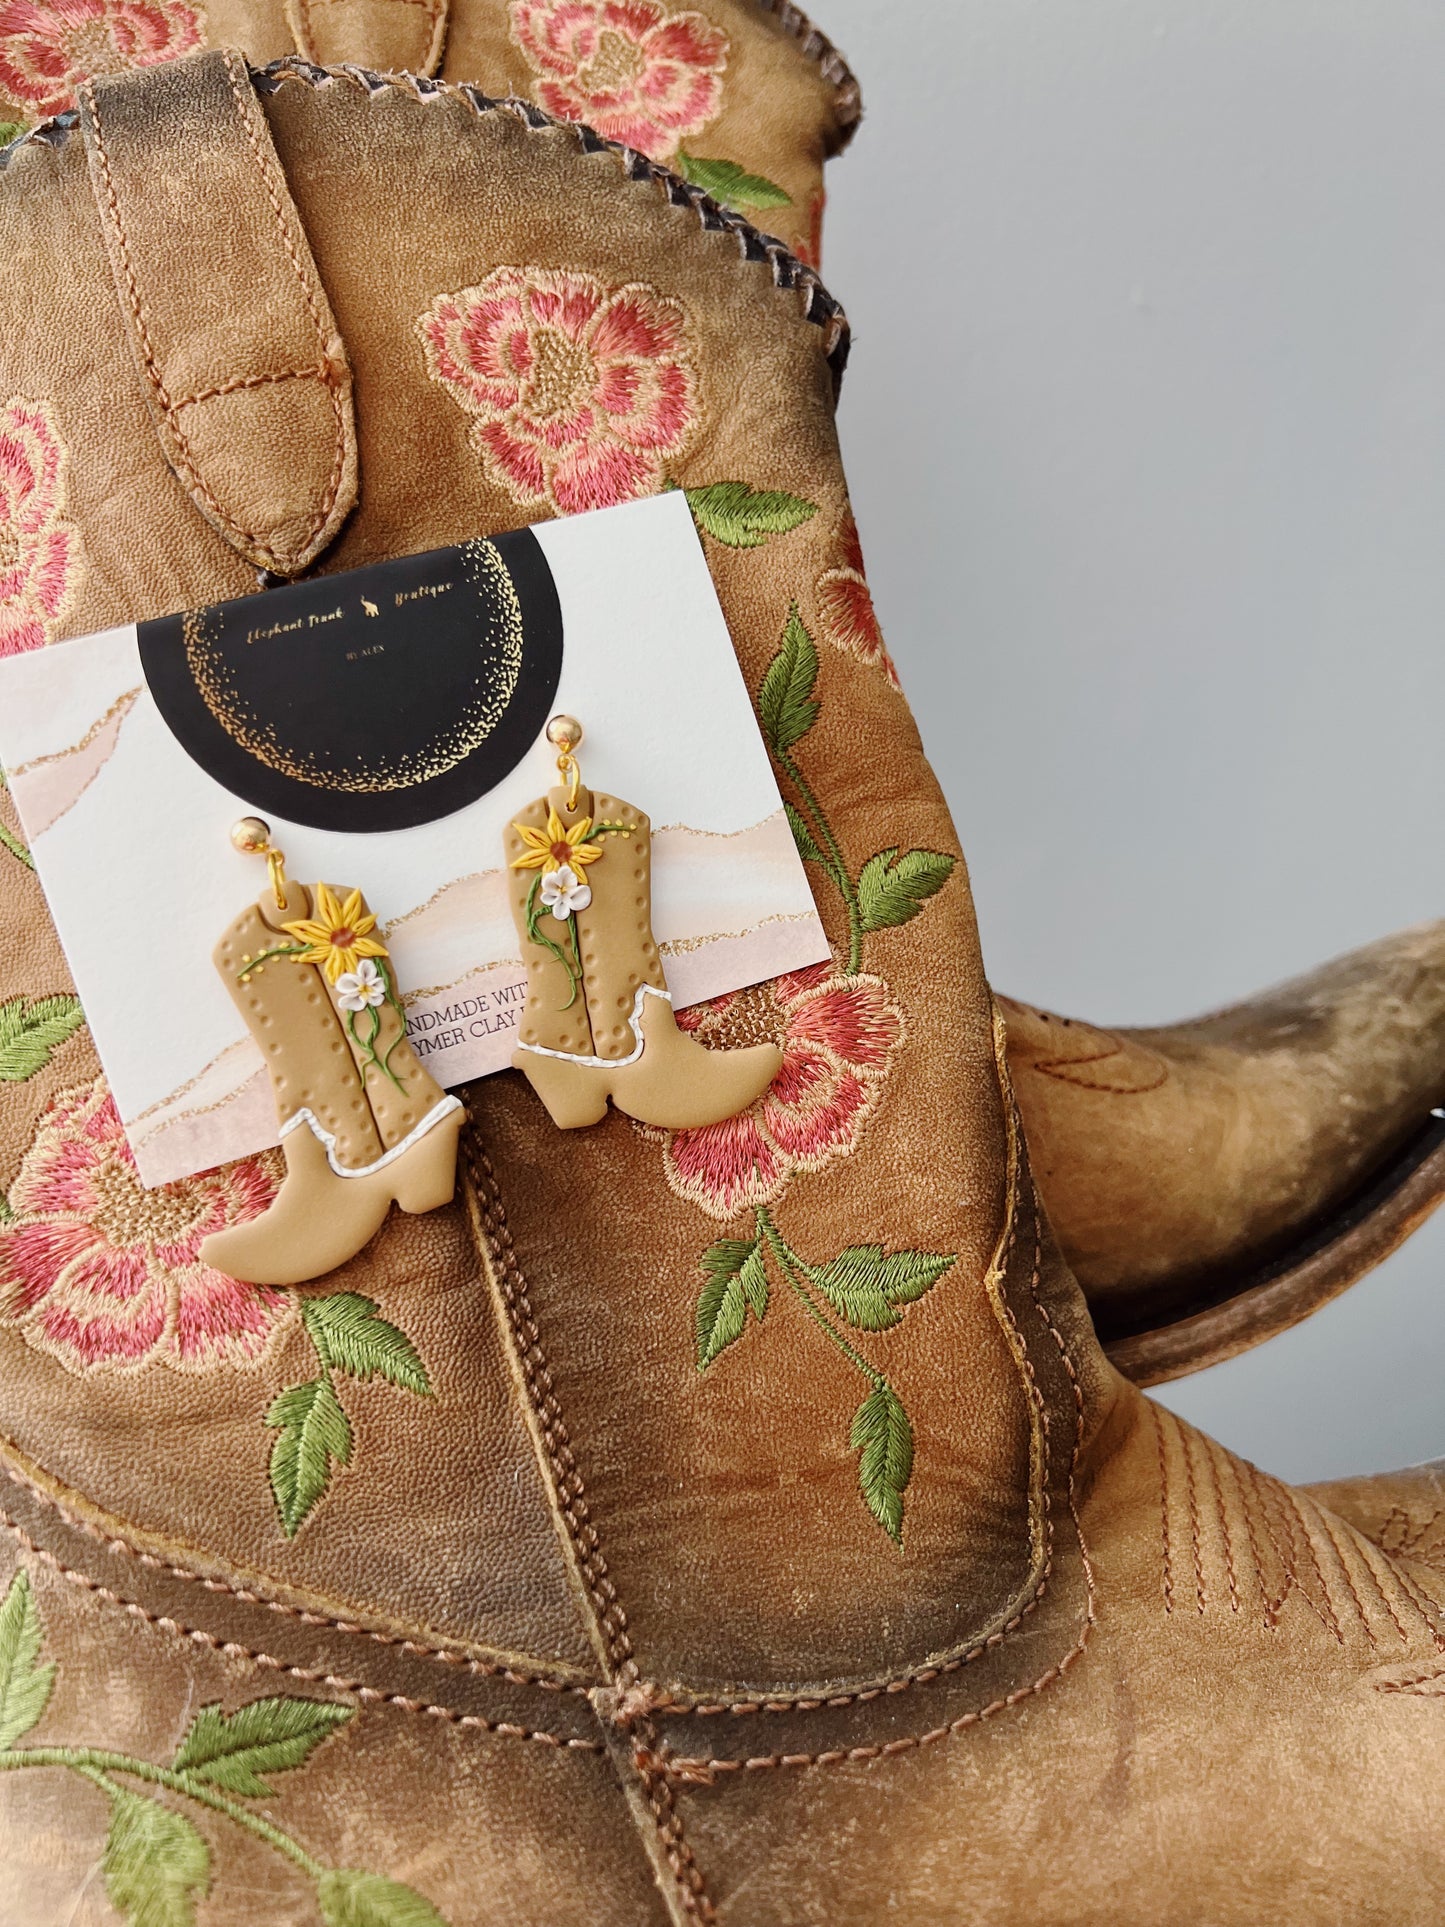 Sunflower Cowgirl Boot Dangles